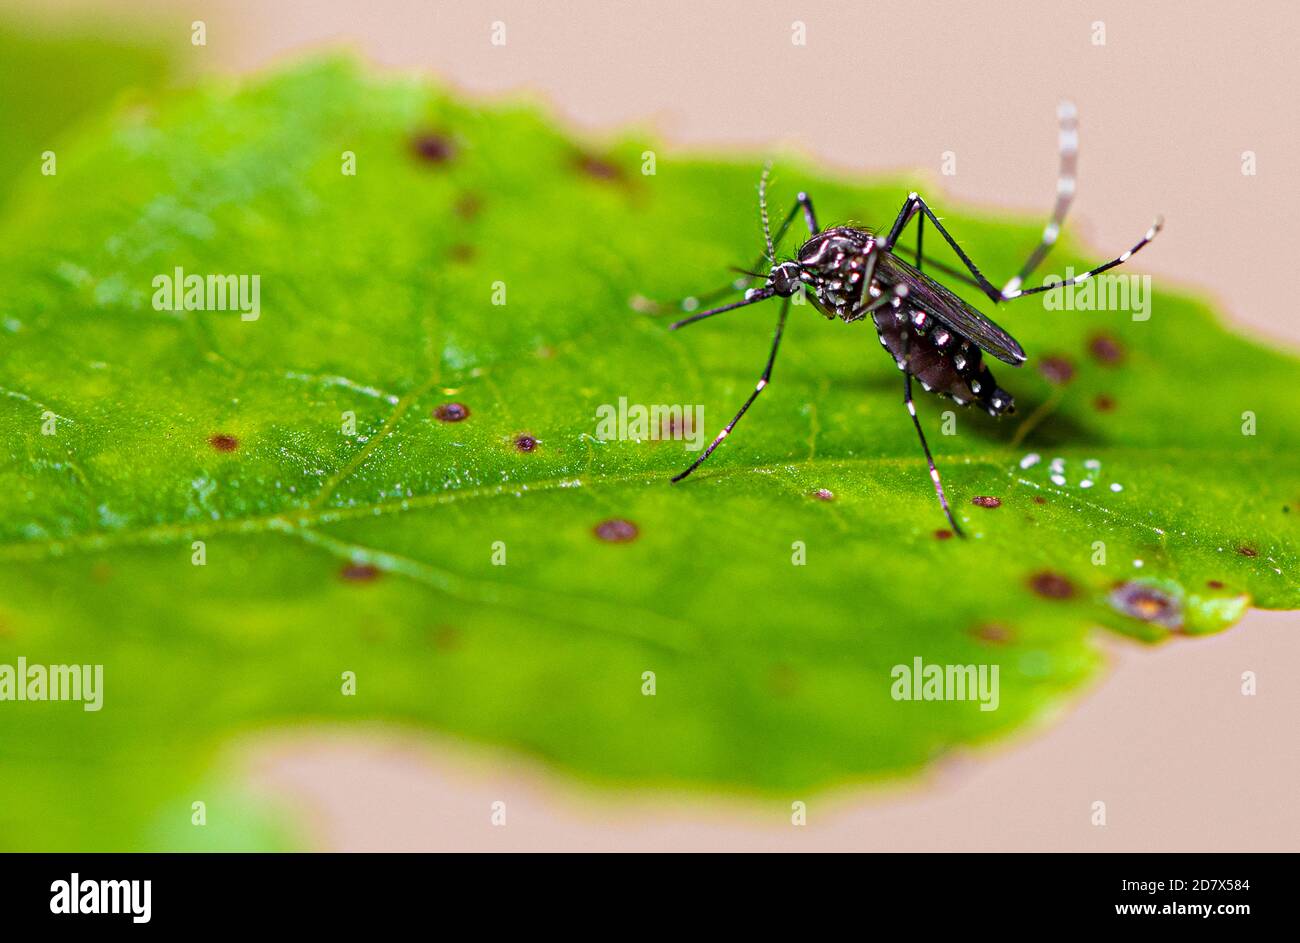 Aedes aegypti mosquito pernilongo with white spots and green leaf Stock Photo